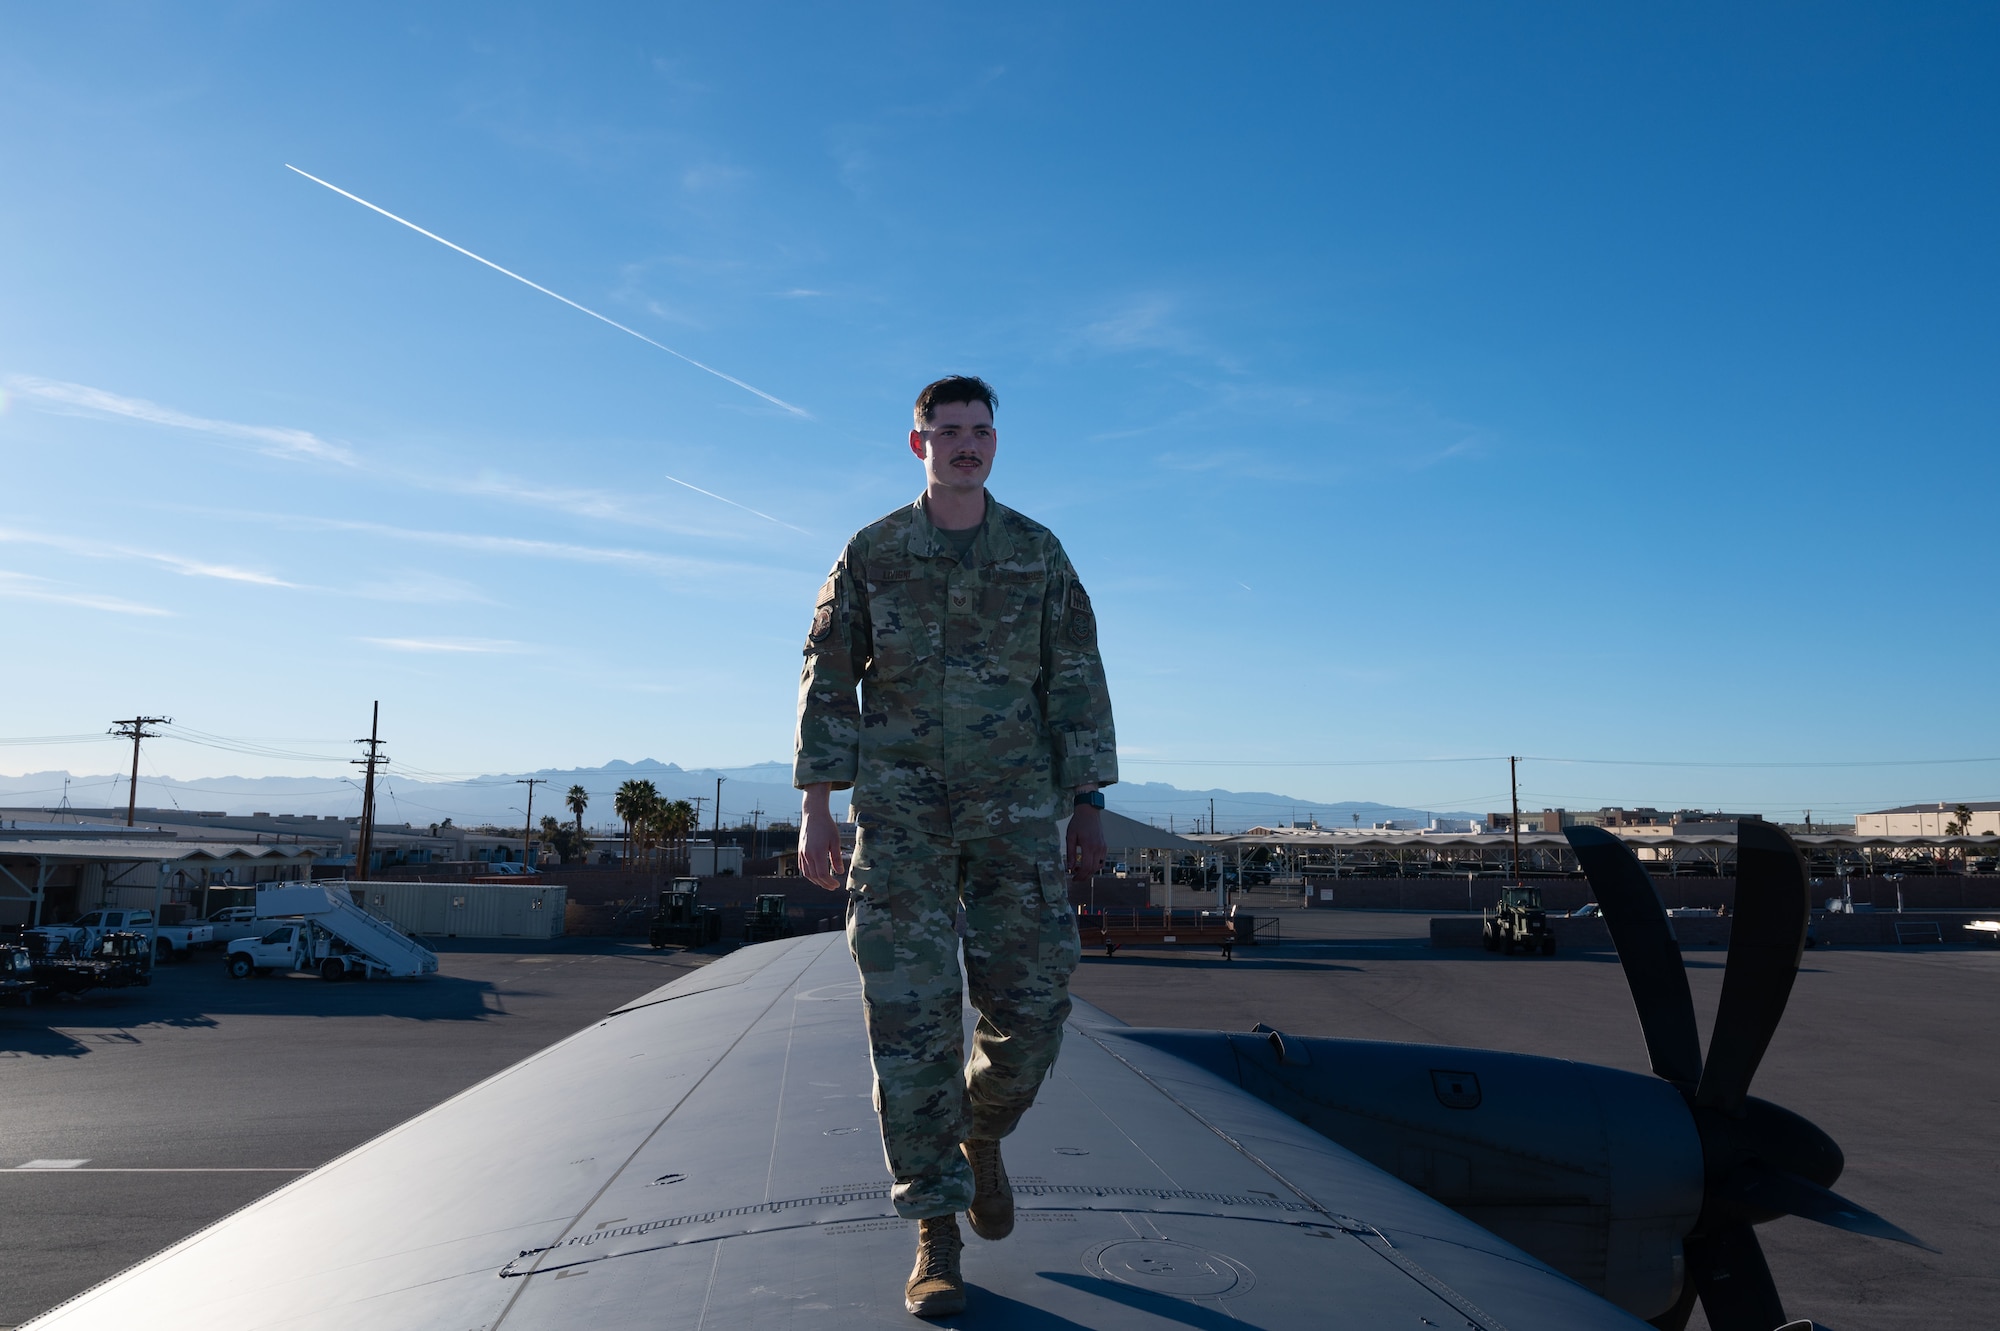 U.S. Air Force Staff Sgt. Blake Livigni, a 317th Aircraft Maintenance Squadron aircraft maintenance technician assigned to the Dyess Air Force Base, Texas, walks on the wing of a C-130J Super Hercules during Bamboo Eagle 24-1 at Nellis Air Force Base, Nevada, Jan. 29, 2024. Over 3,000 U.S. service members across four branches flew, maintained and supported more than 150 aircraft from over 20 units in multiple locations during Bamboo Eagle. (U.S. Air Force photo by Airman 1st Class Timothy Perish)